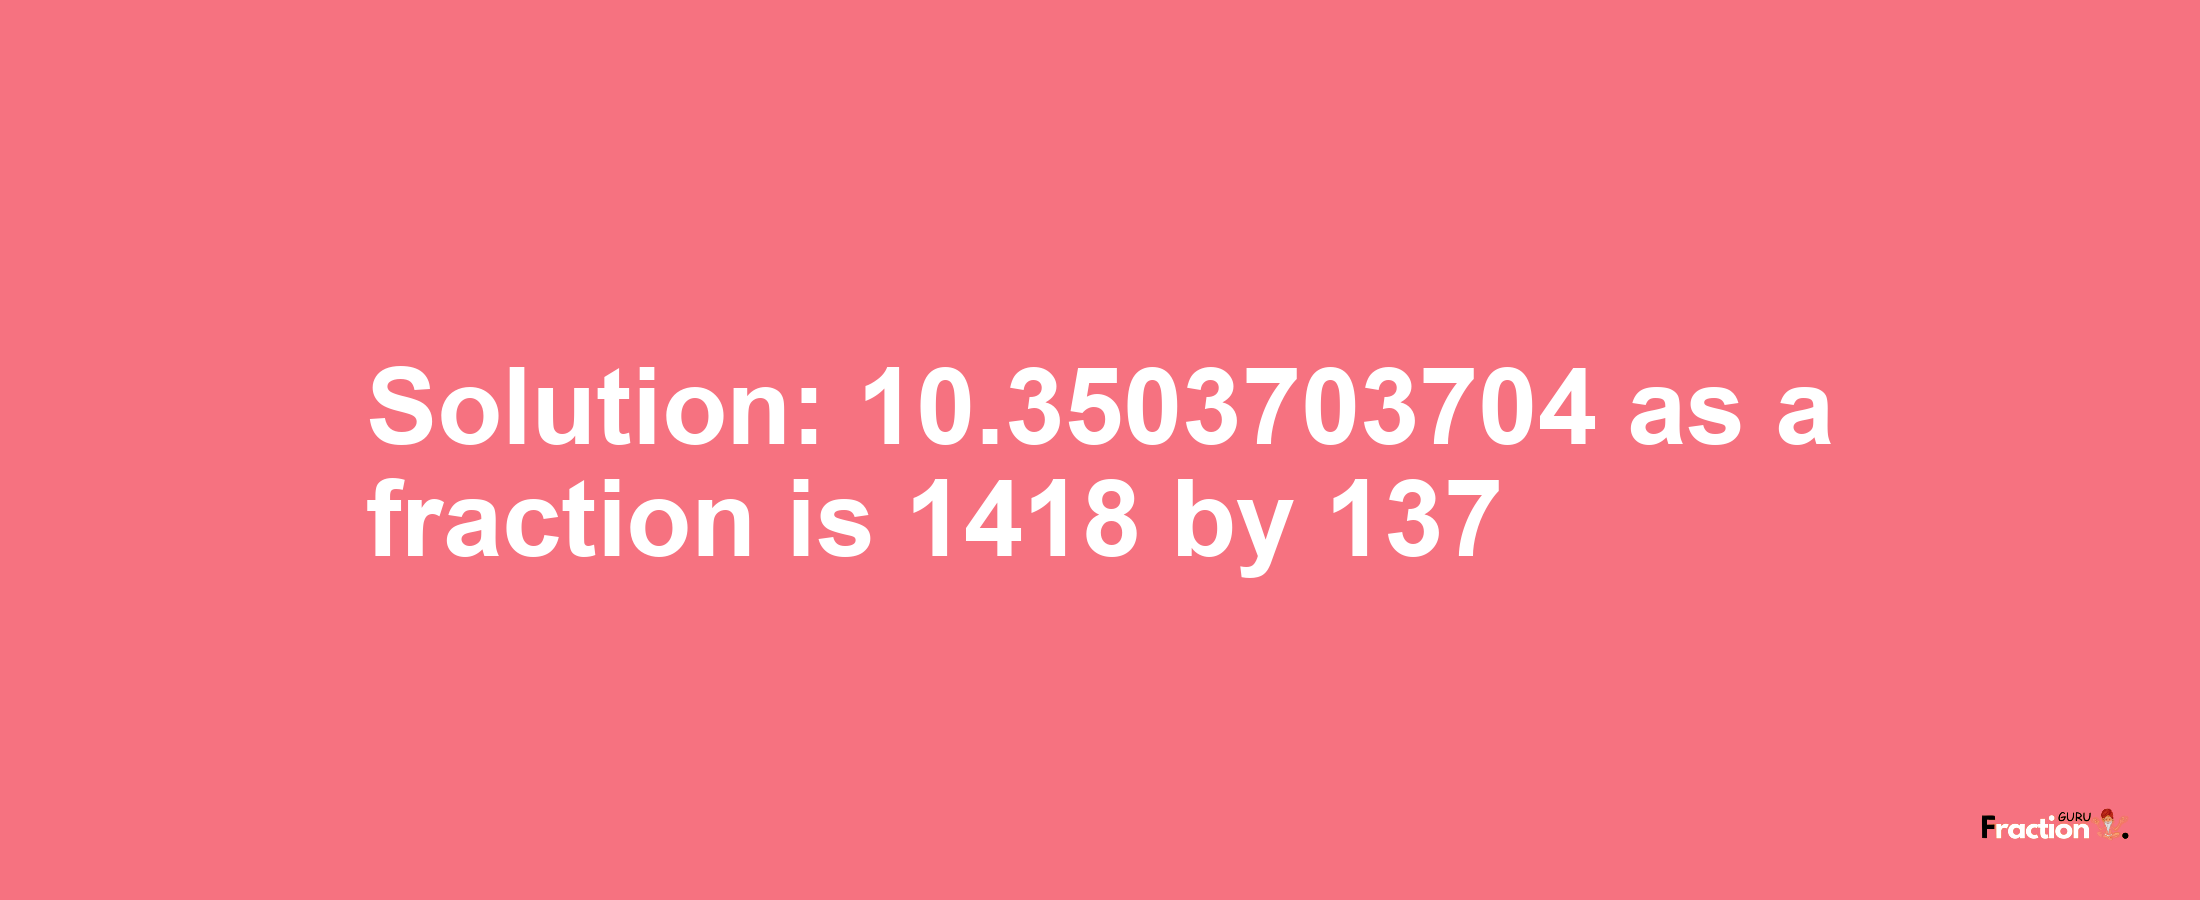 Solution:10.3503703704 as a fraction is 1418/137